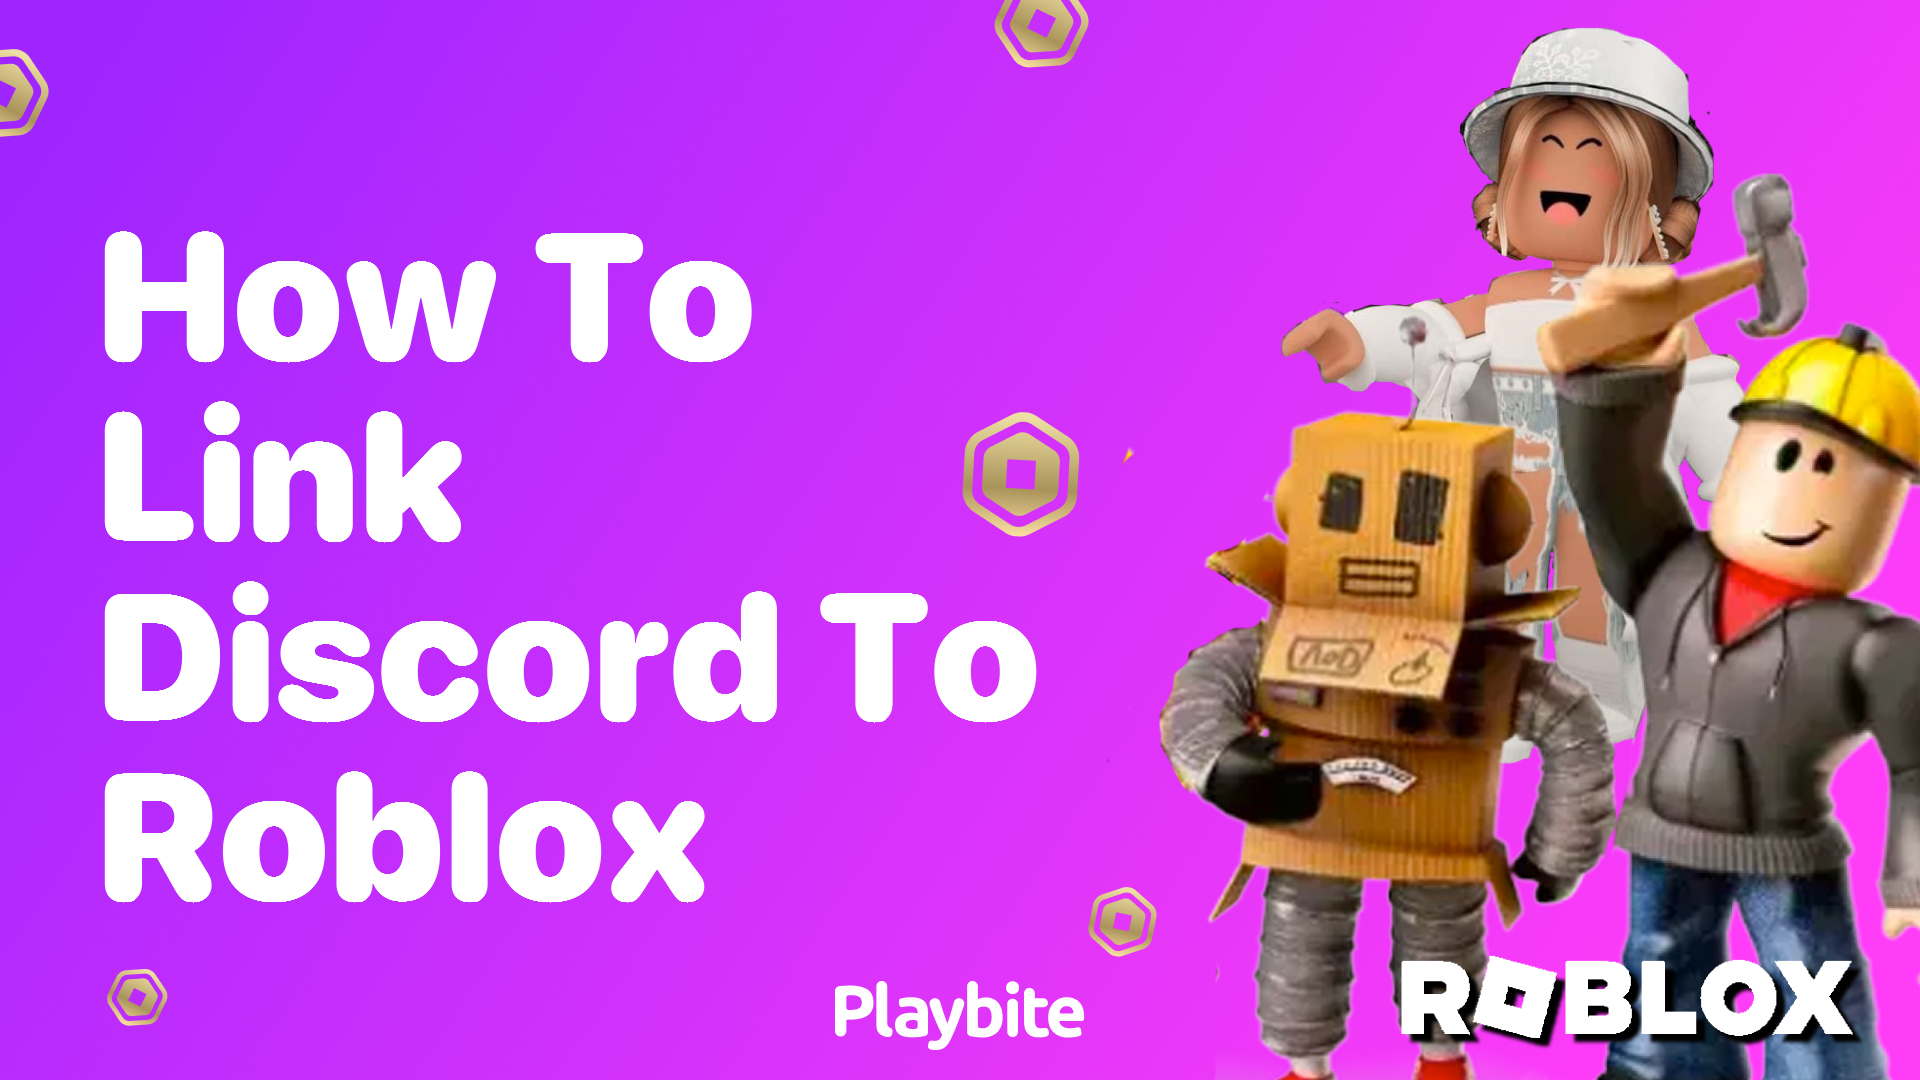 How to Link Discord to Roblox: A Simple Guide